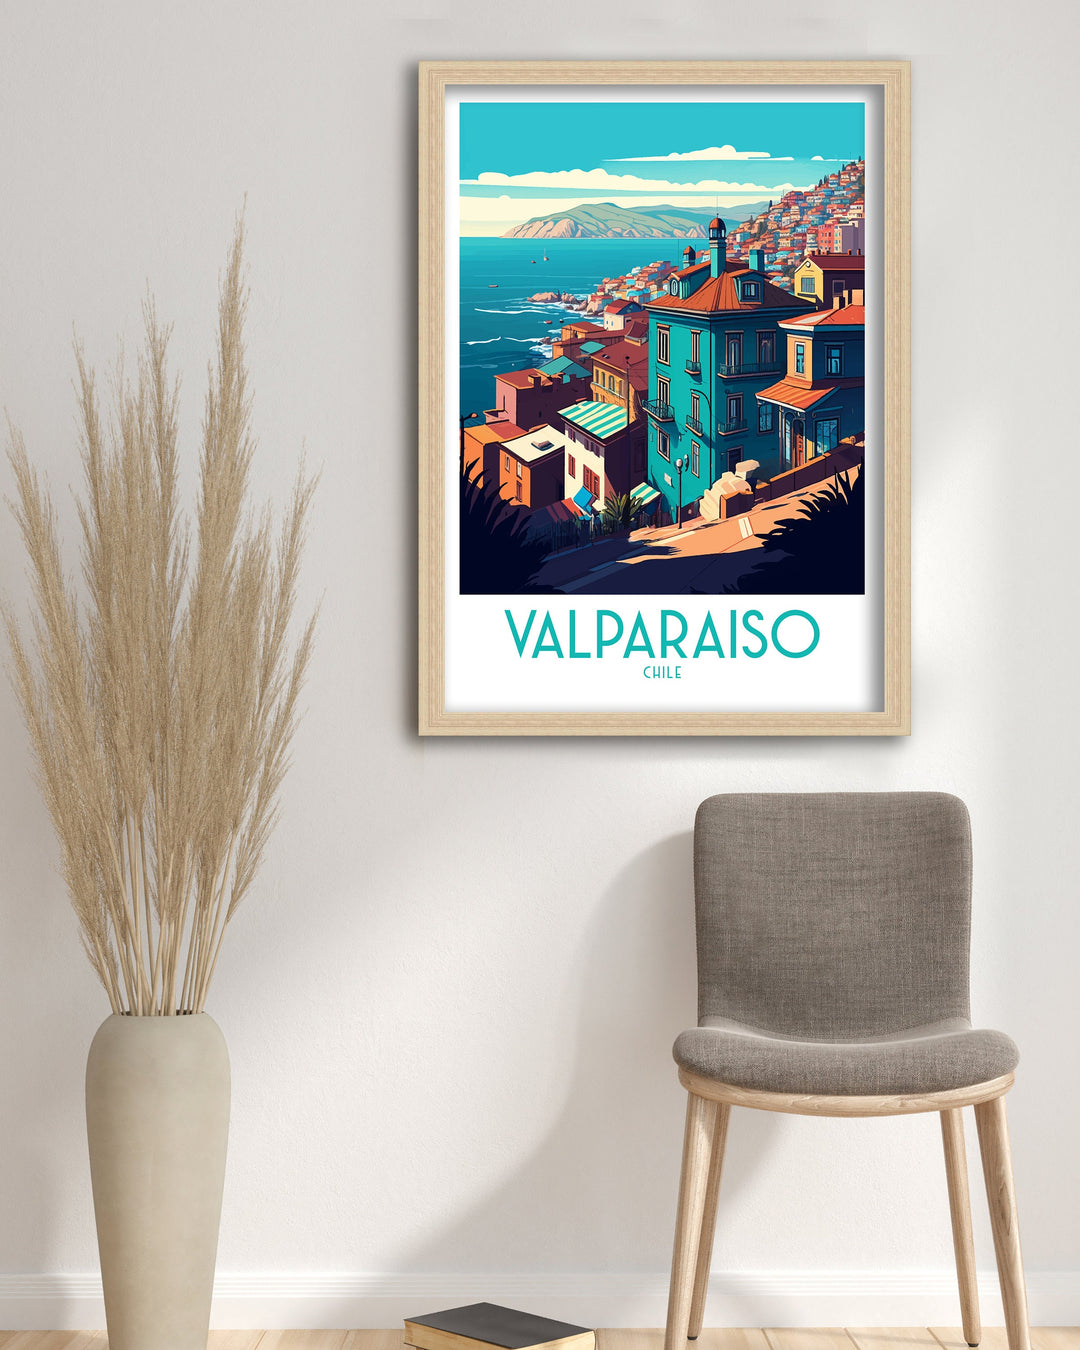 Valparaiso Chile Travel Poster, Chile Wall Art, Chile Home Decor, Chile Illustration, Travel Poster, Gift For Chile, Chile Home Living Decor